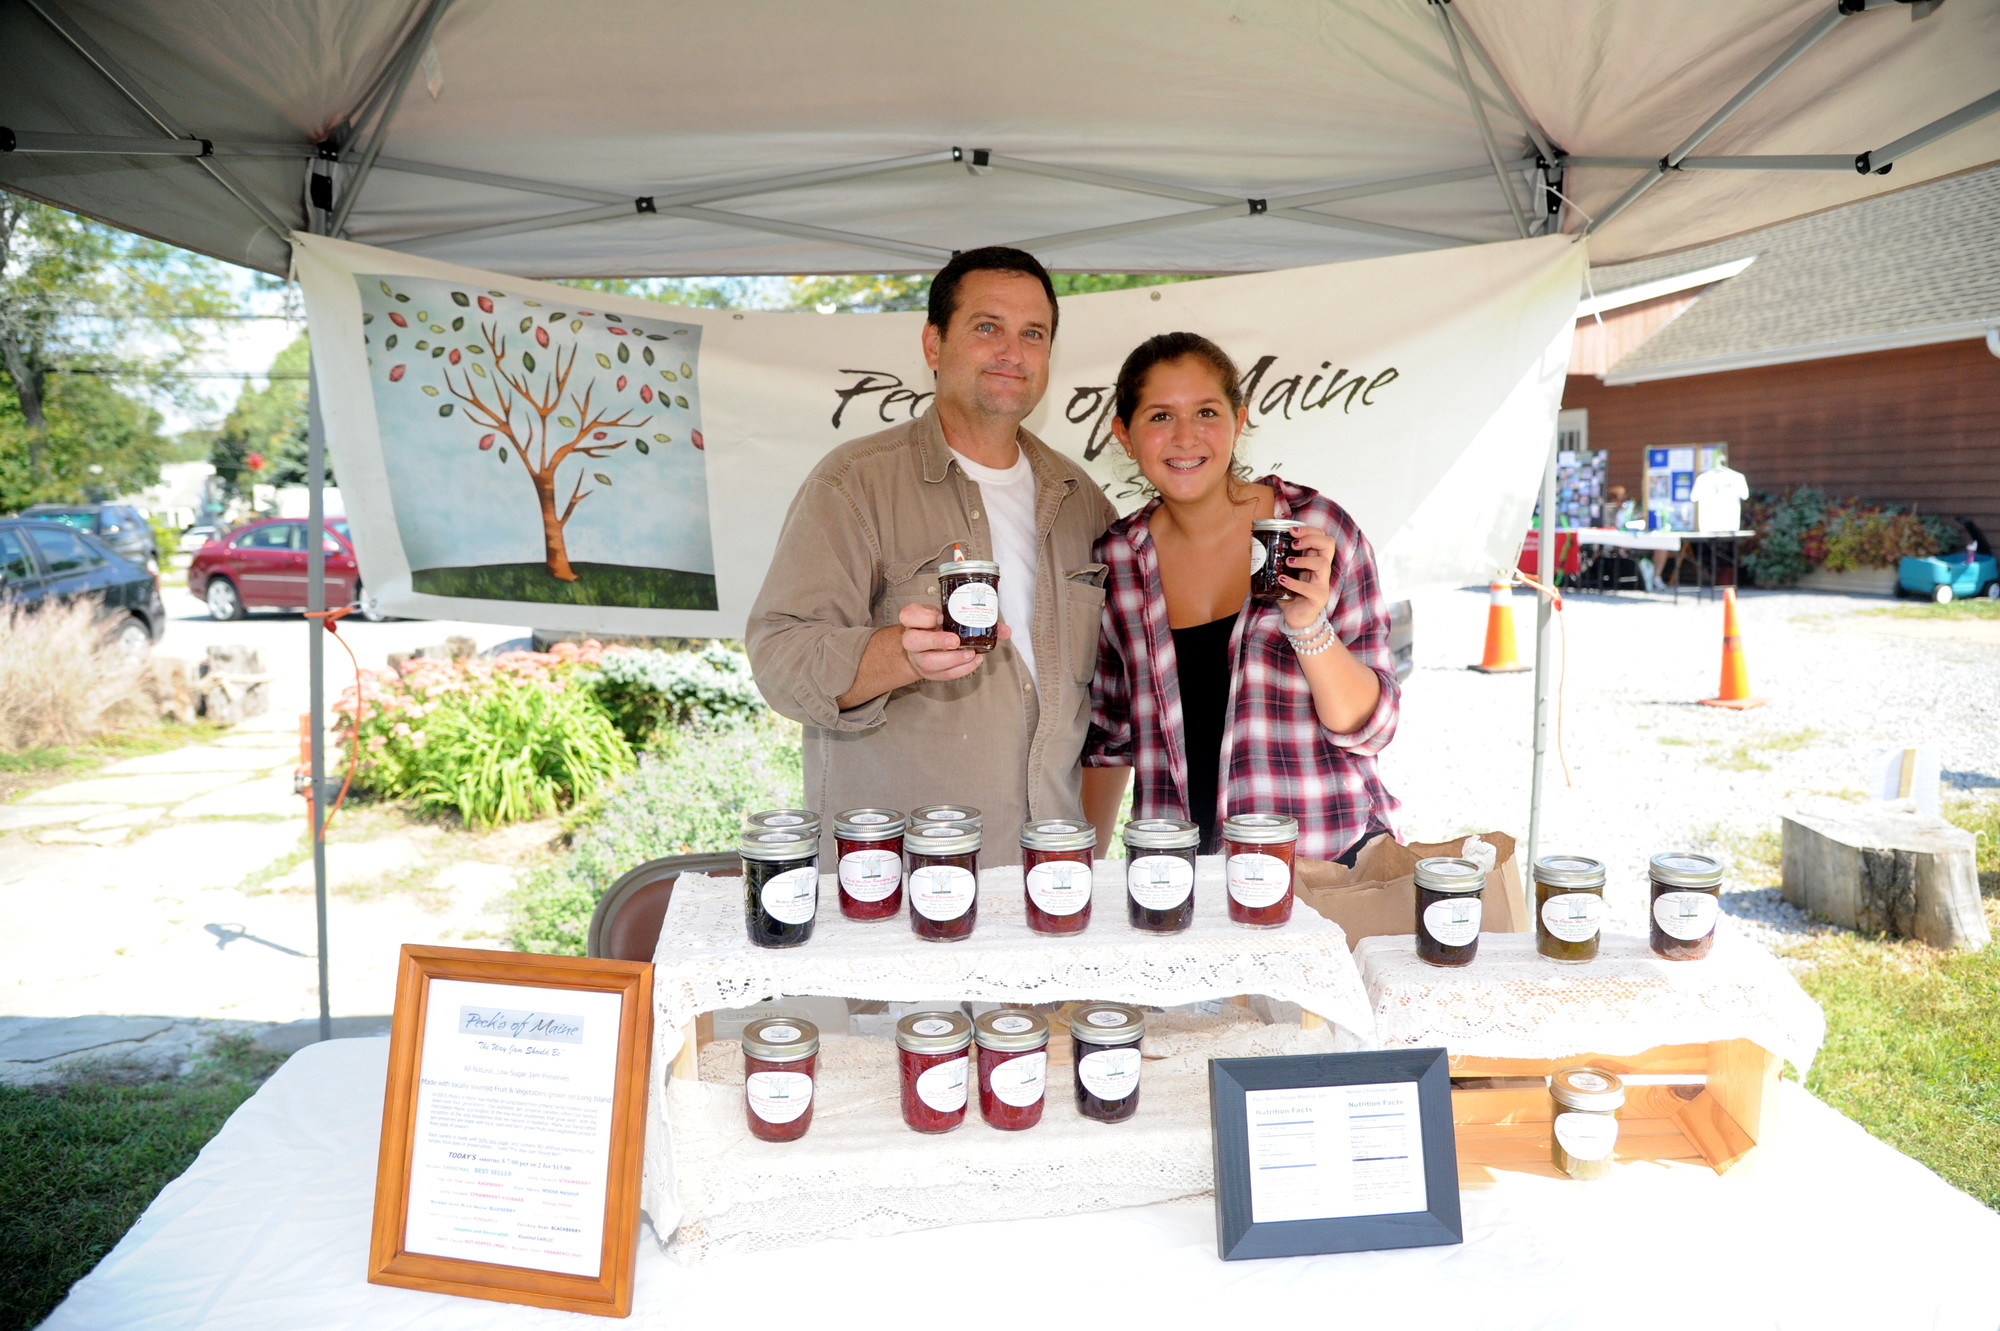 Brian and Melissa Jeran sold homemade jam throughout the weekend.